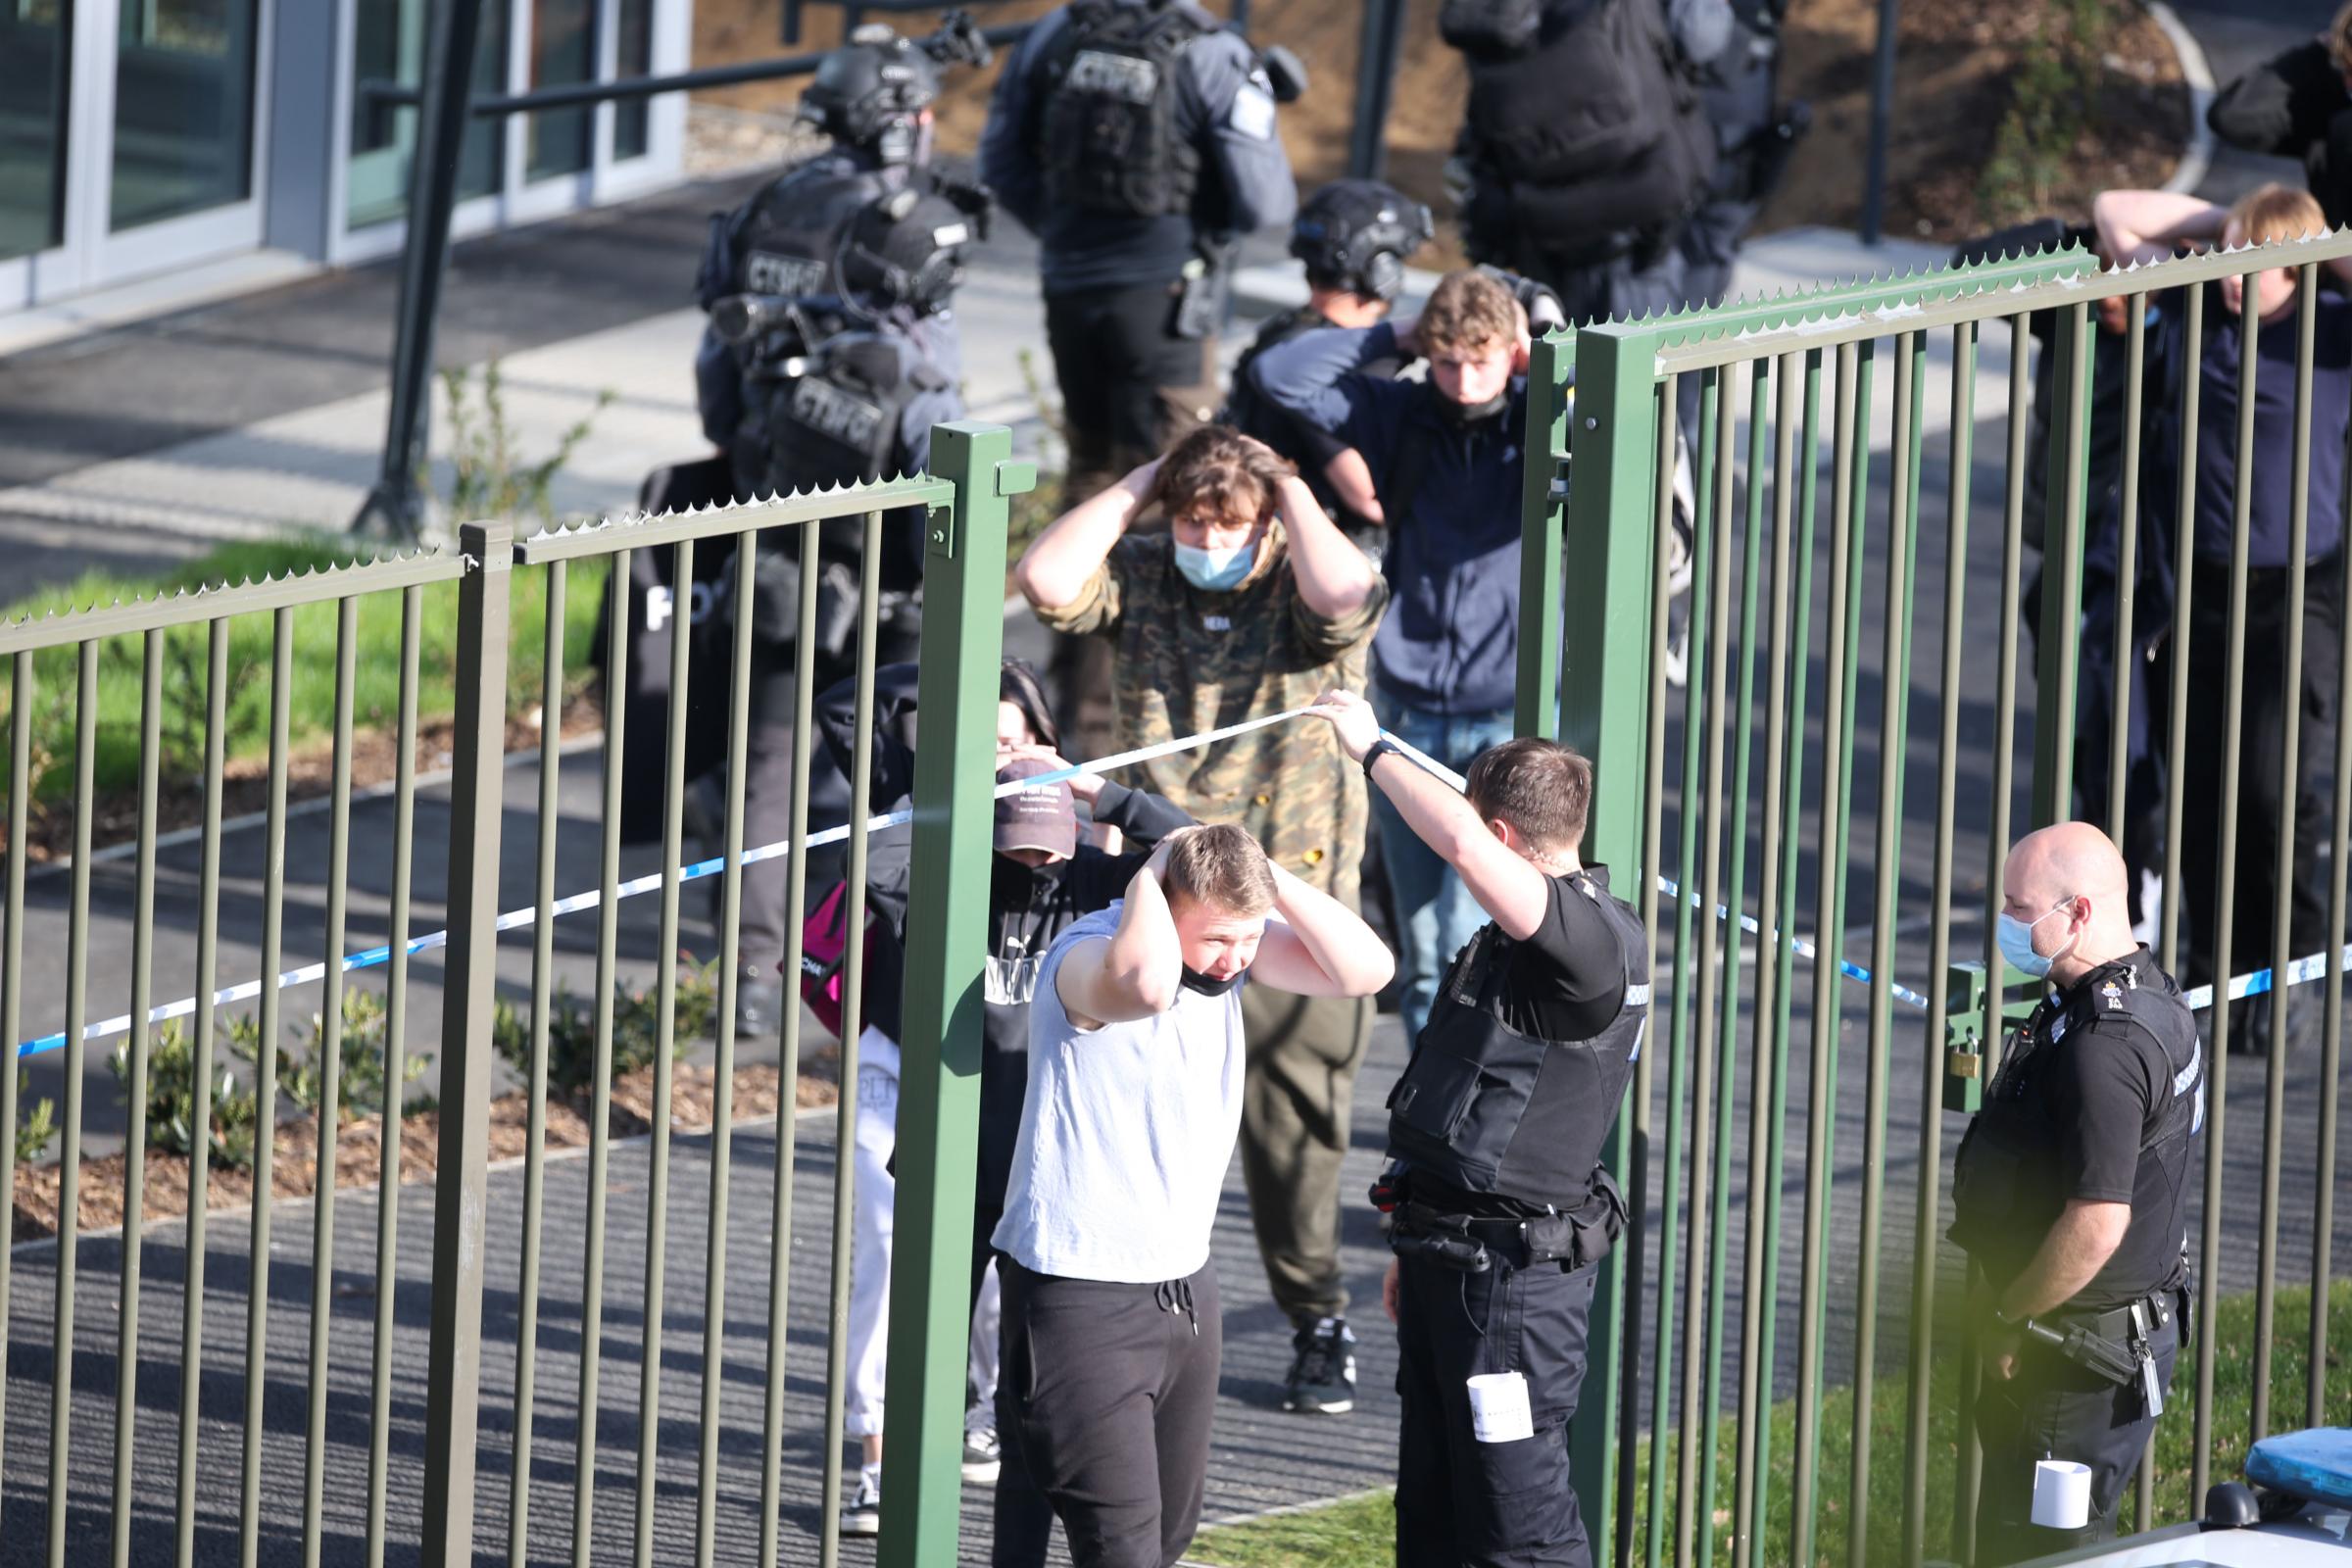 CRAWLEY FIREARMS INCIDENT - STUDENTS LEAVING THE BUILDING WITH HANDS ON THIER HEADS.